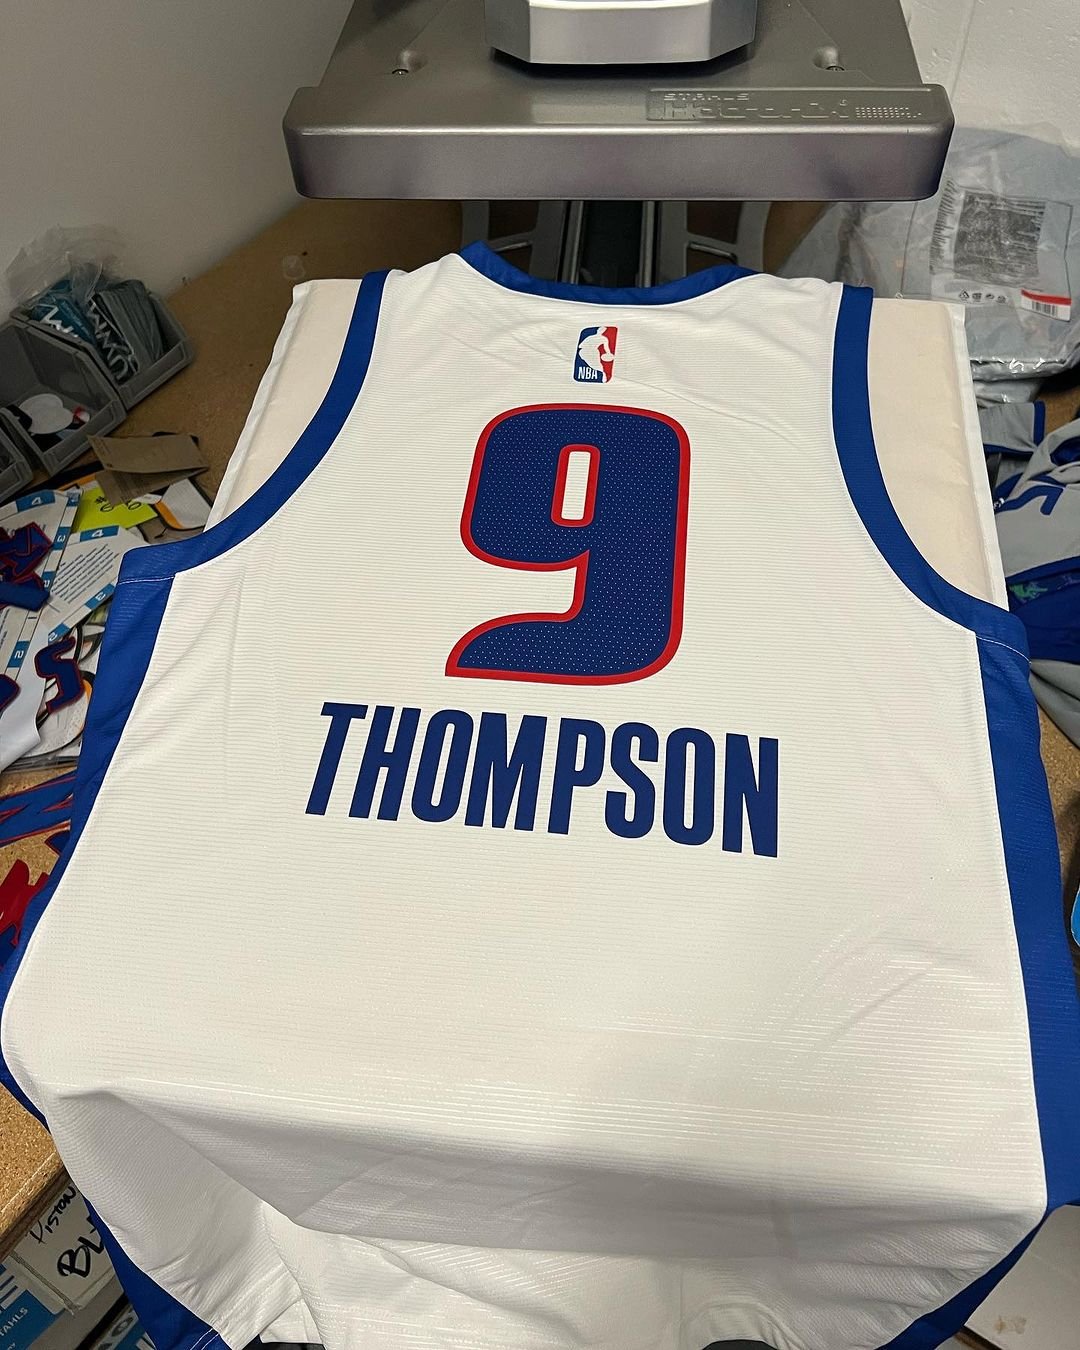 Detroit Pistons Team-Issued #62 White Jersey from the 2021 NBA Summer League  - Size XL+